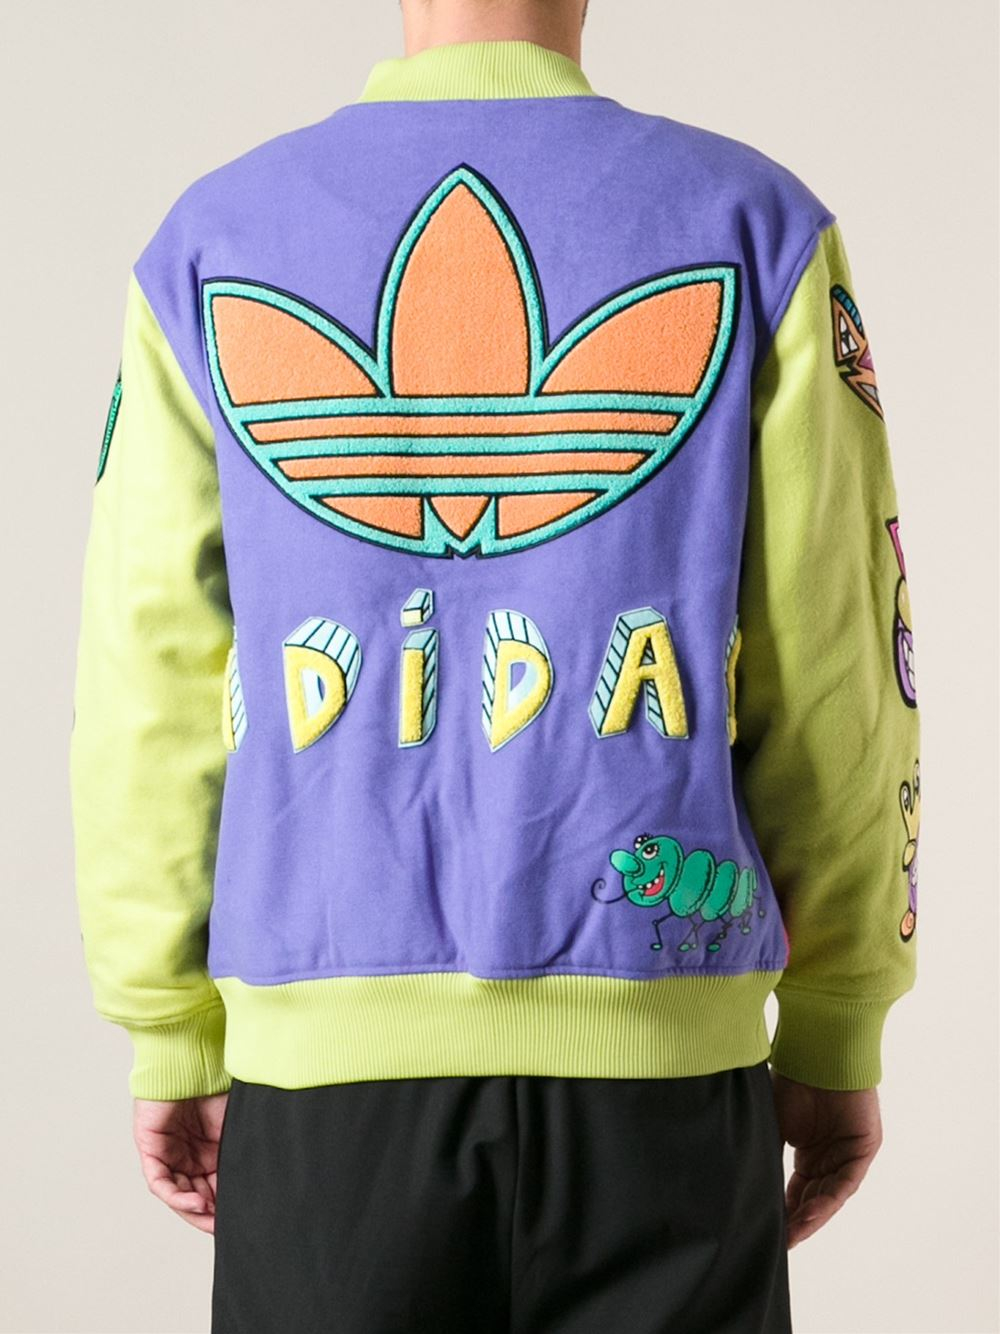 Lyst - Adidas Jeremy Scott Embroidered Bomber Jacket in Pink for Men